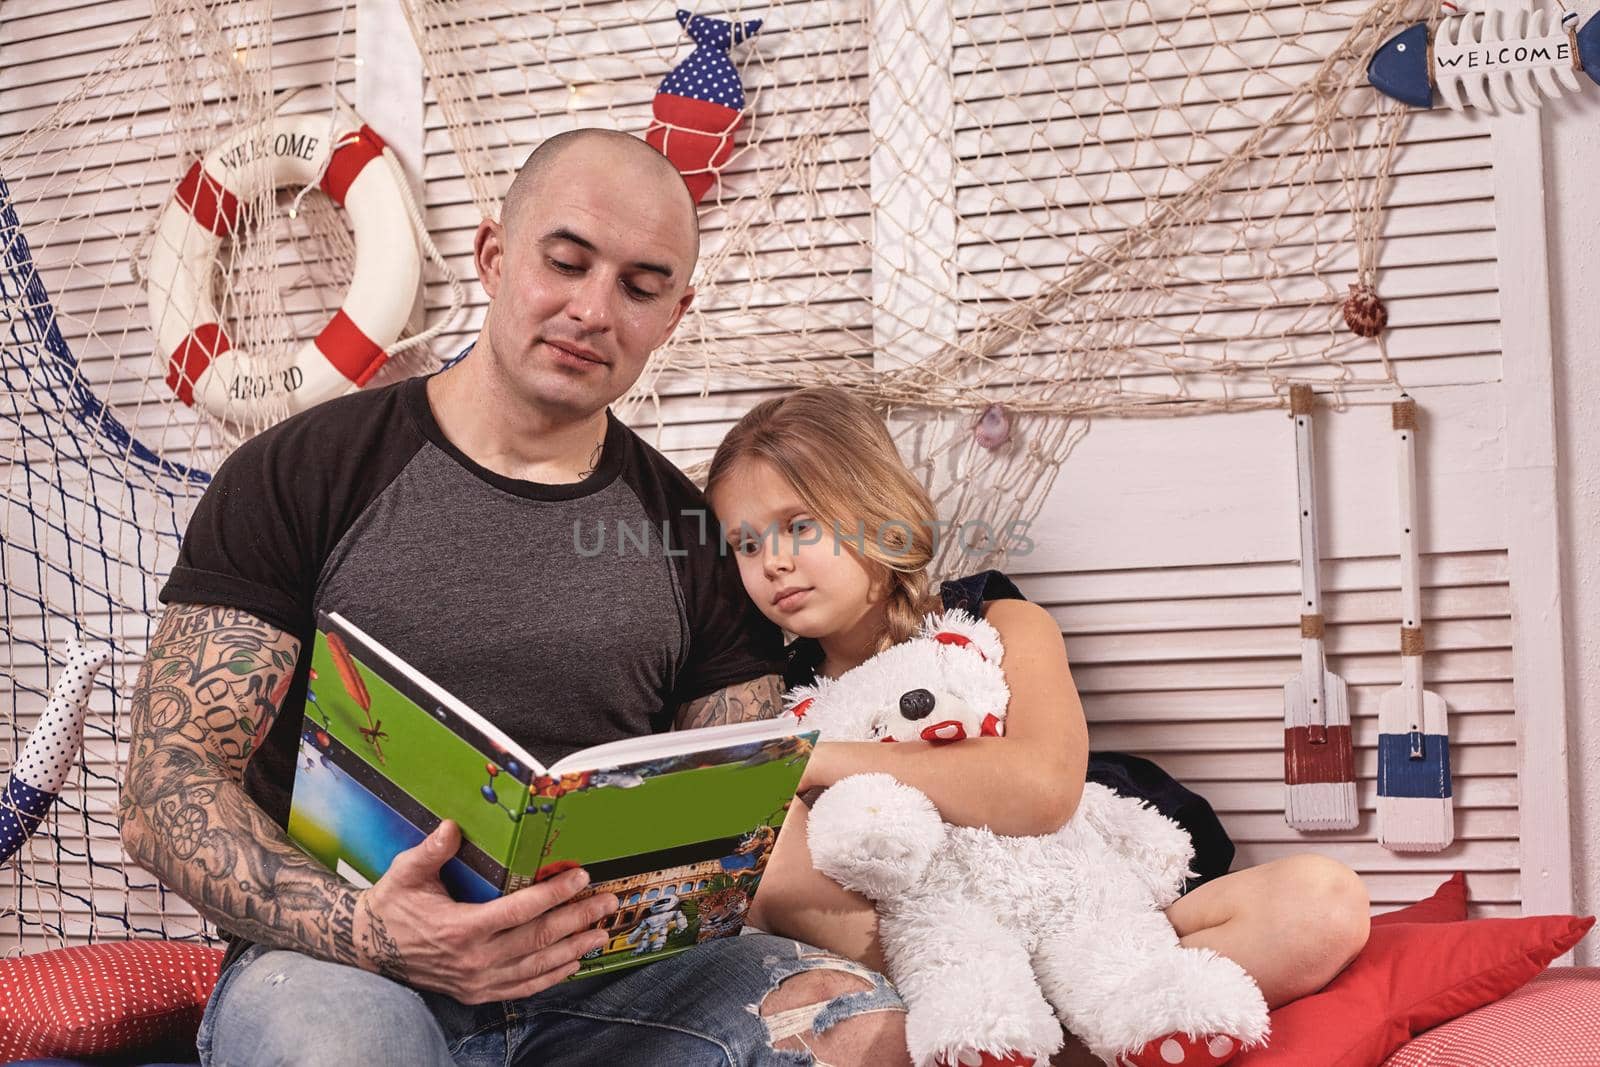 Bald tattoed man in a cap is spending time with his little cute daughter. They are sitting on a white bench with some red pillows, in a room decorated in a marine style. She is holding a toy bear and looking at the book. Reading fairytales while daughter is sitting nearby. Happy family.